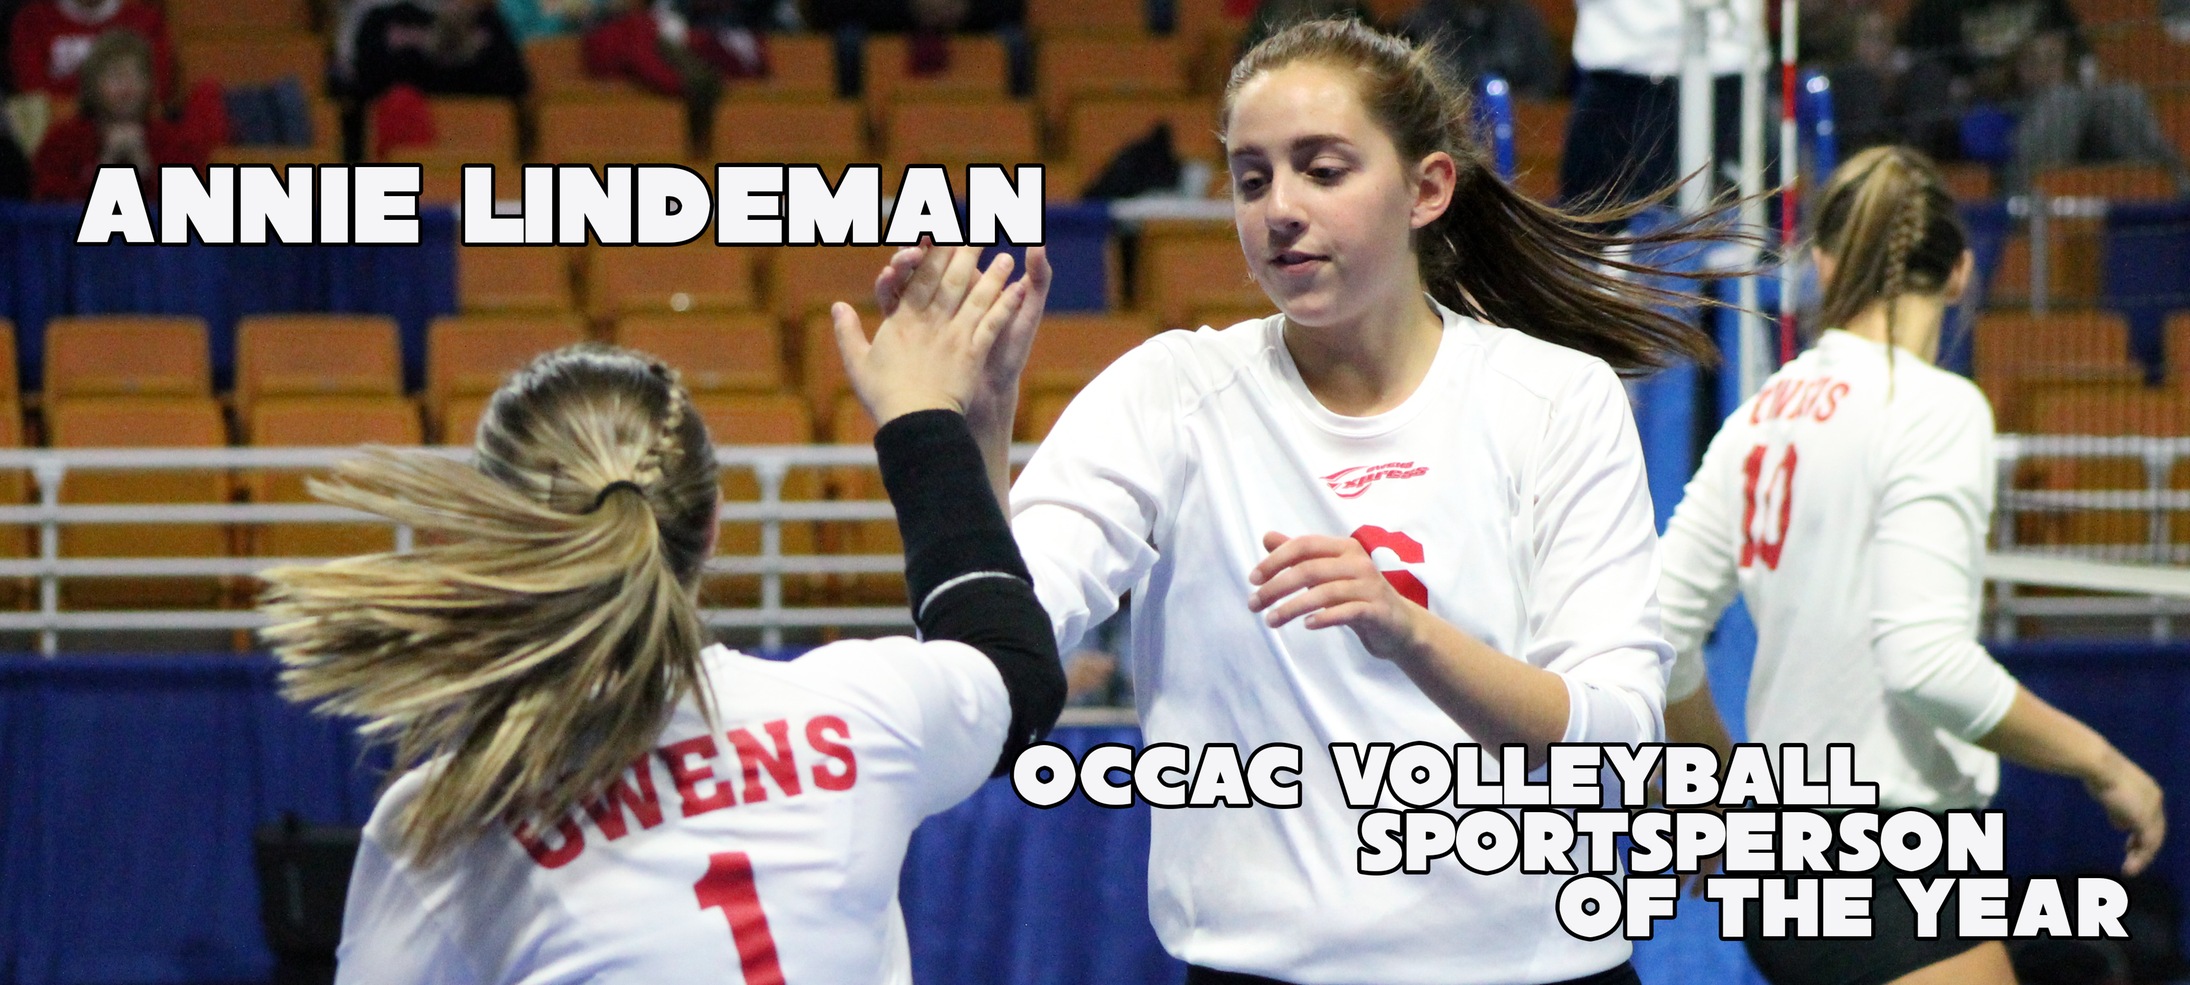 Lindeman, Frost, Bennett Awarded For Sportsmanship By OCCAC